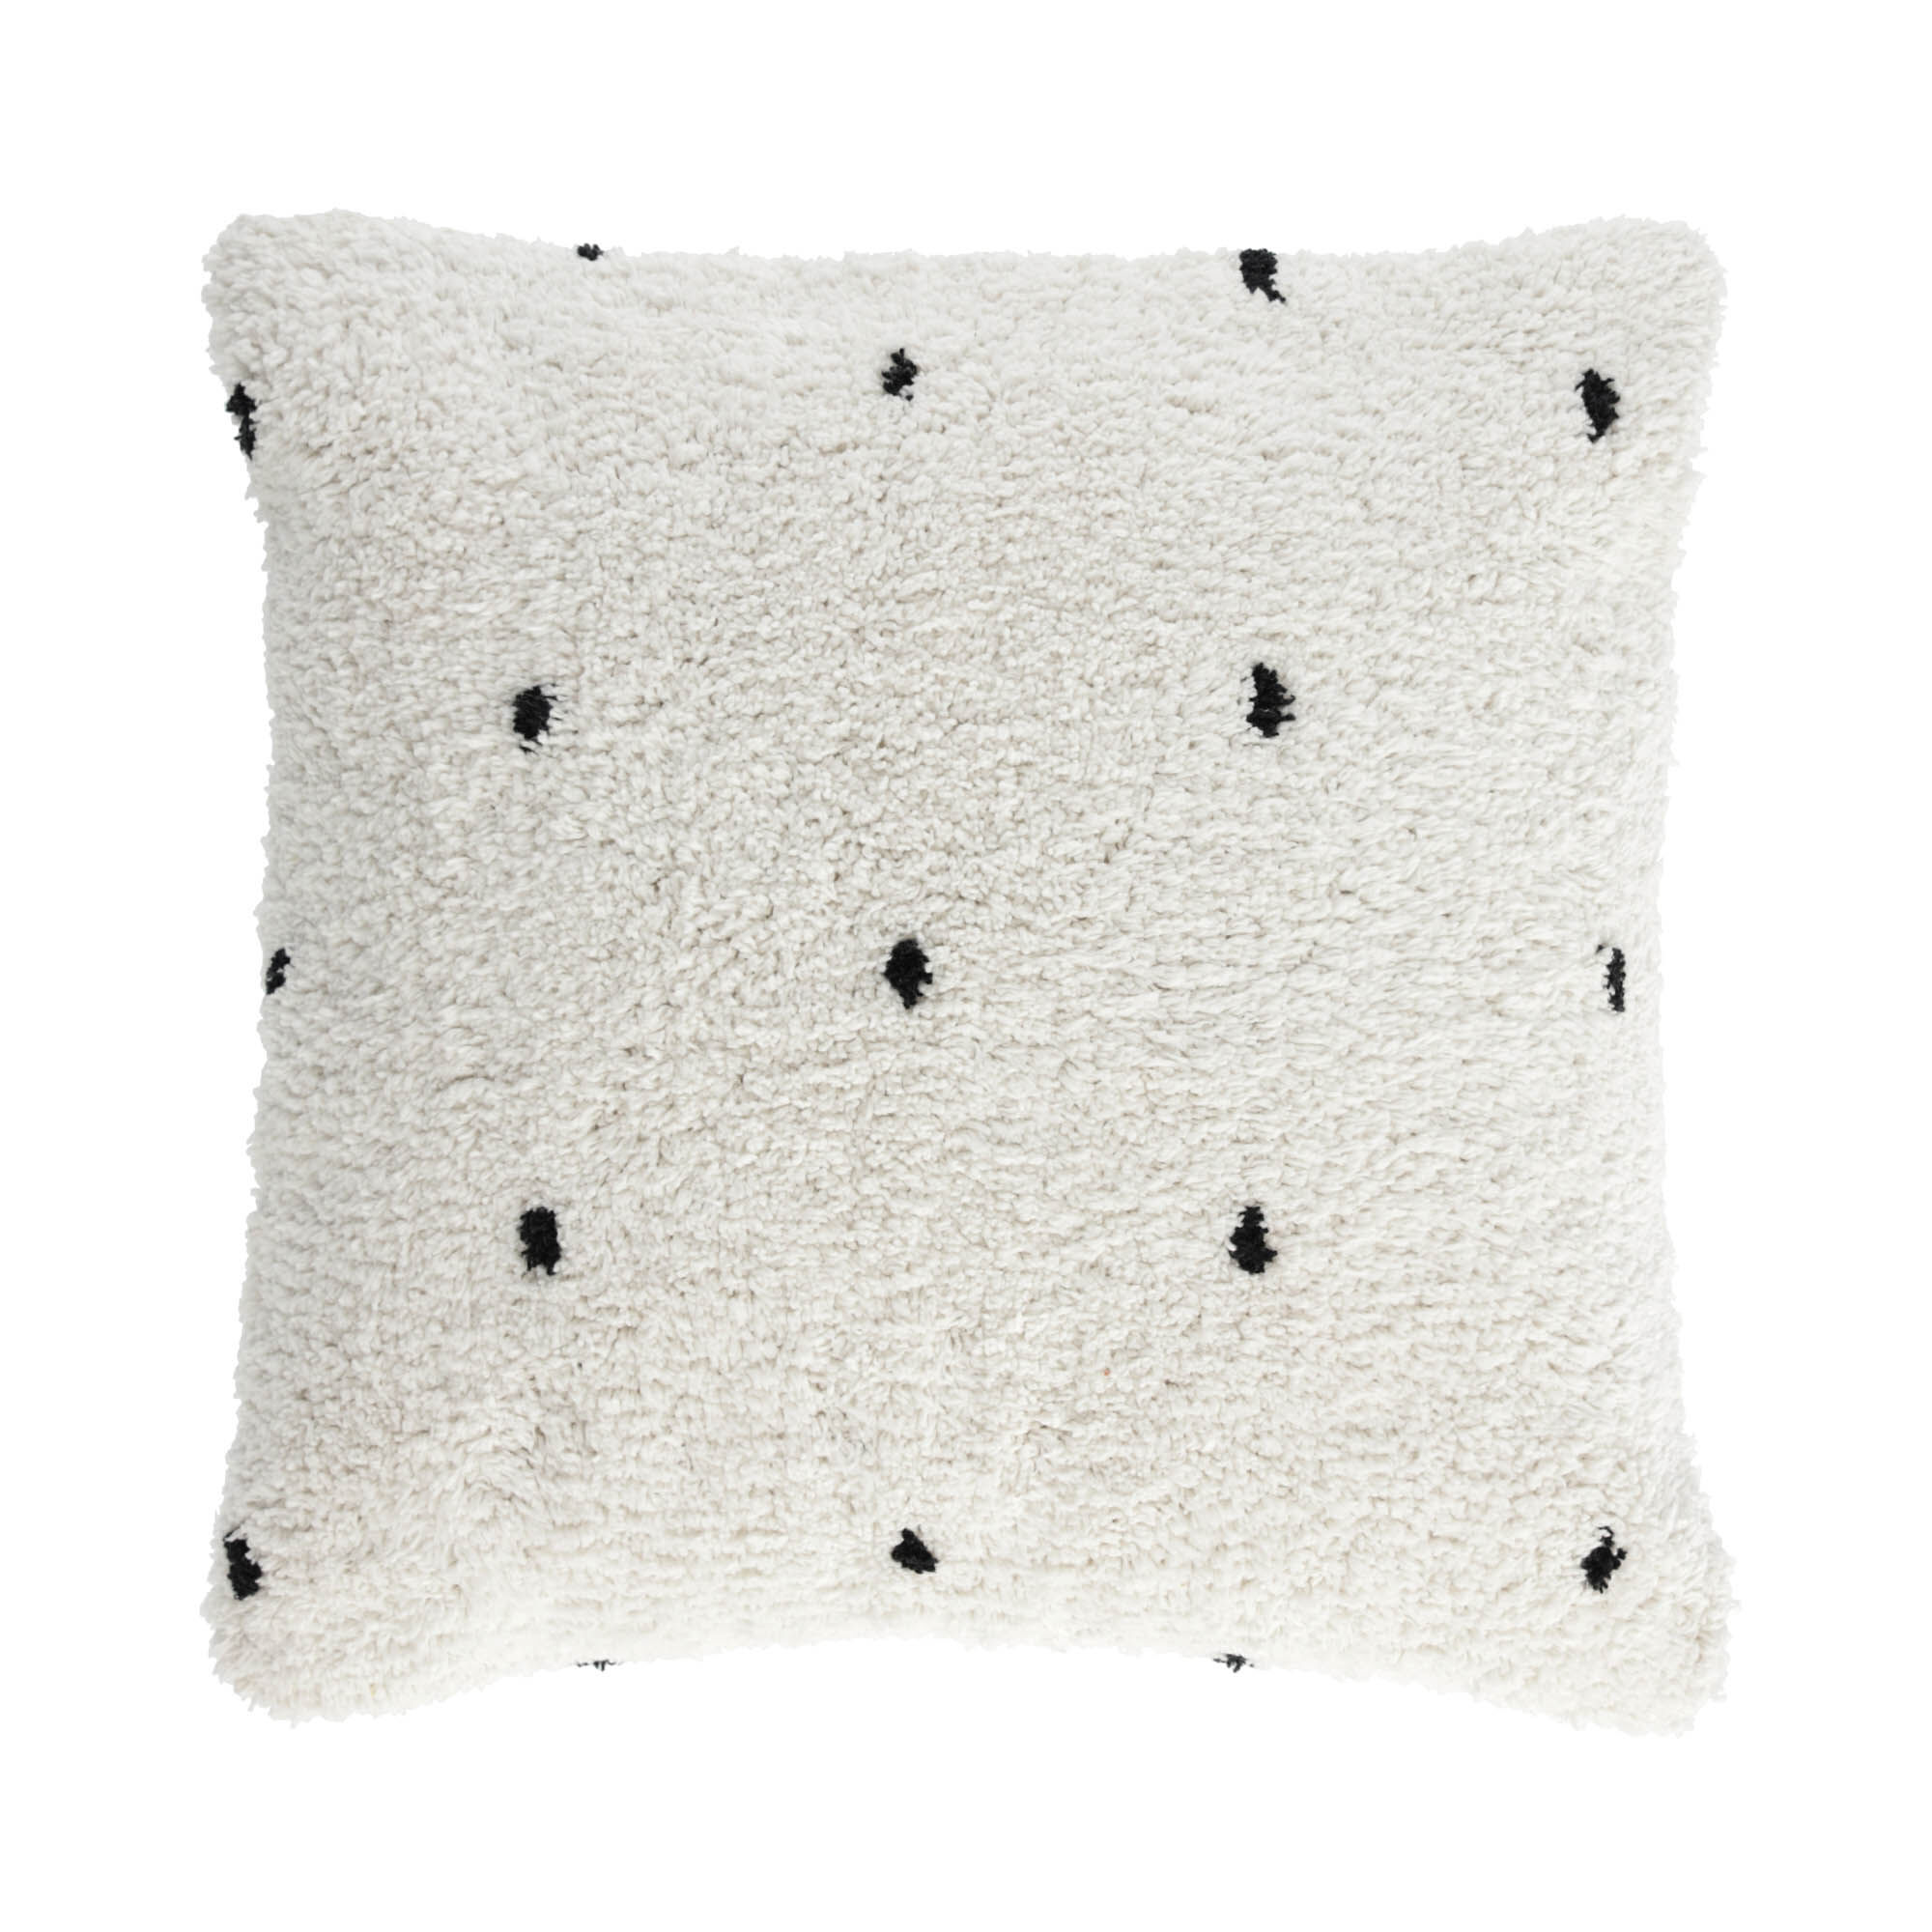 Kave Home Meri cotton cushion cover in white and black dots 45 x 45 cm